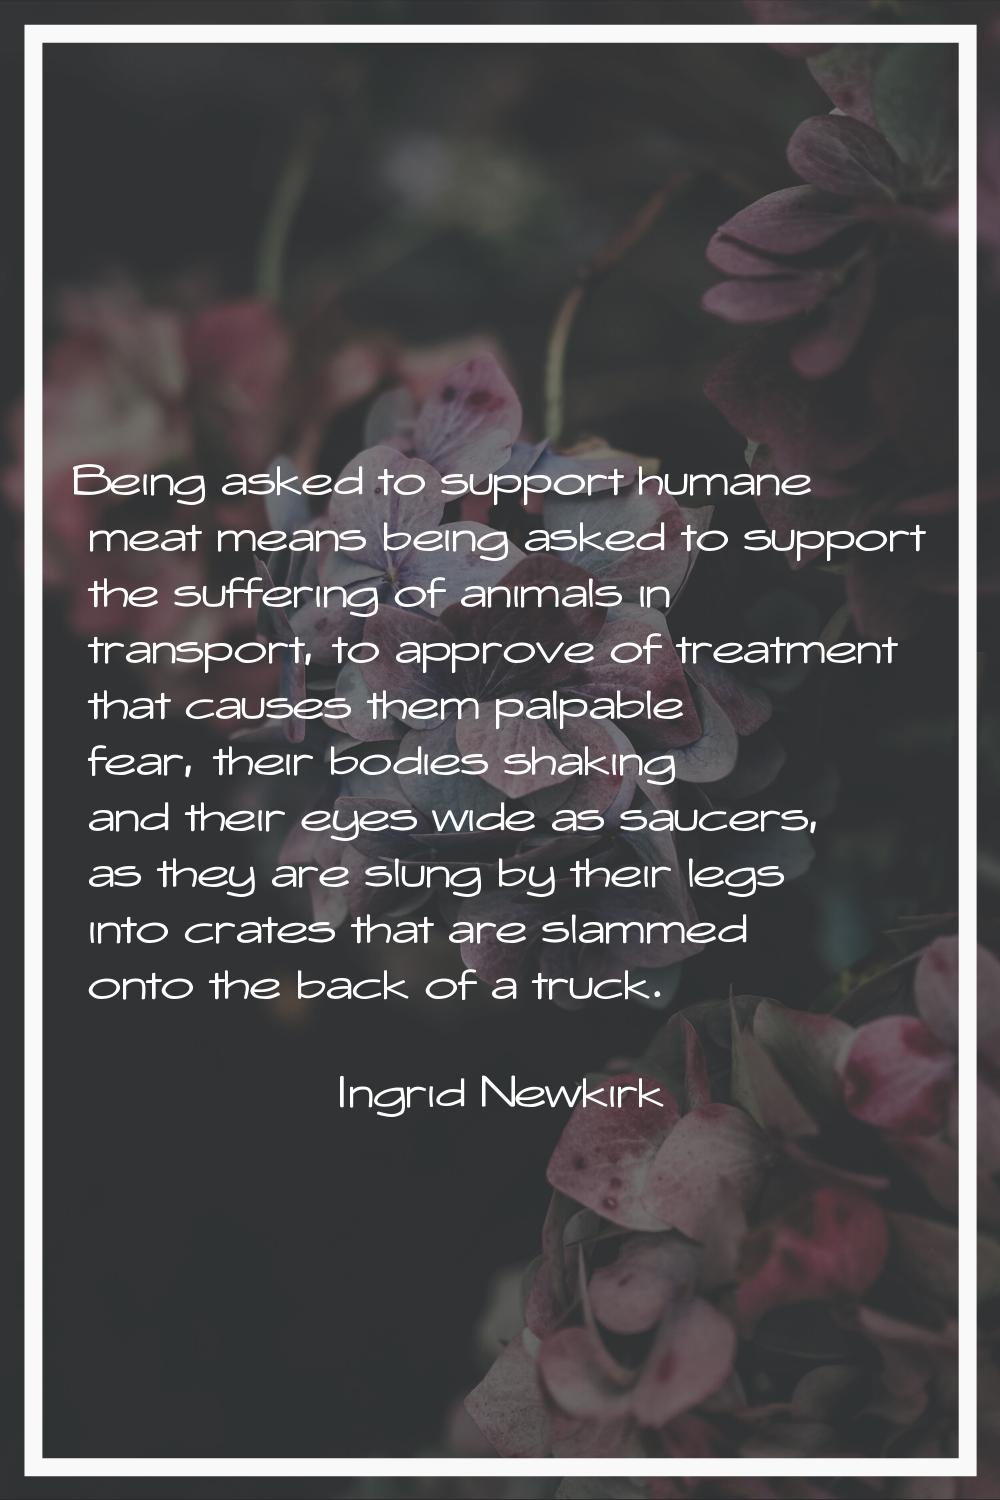 Being asked to support humane meat means being asked to support the suffering of animals in transpo